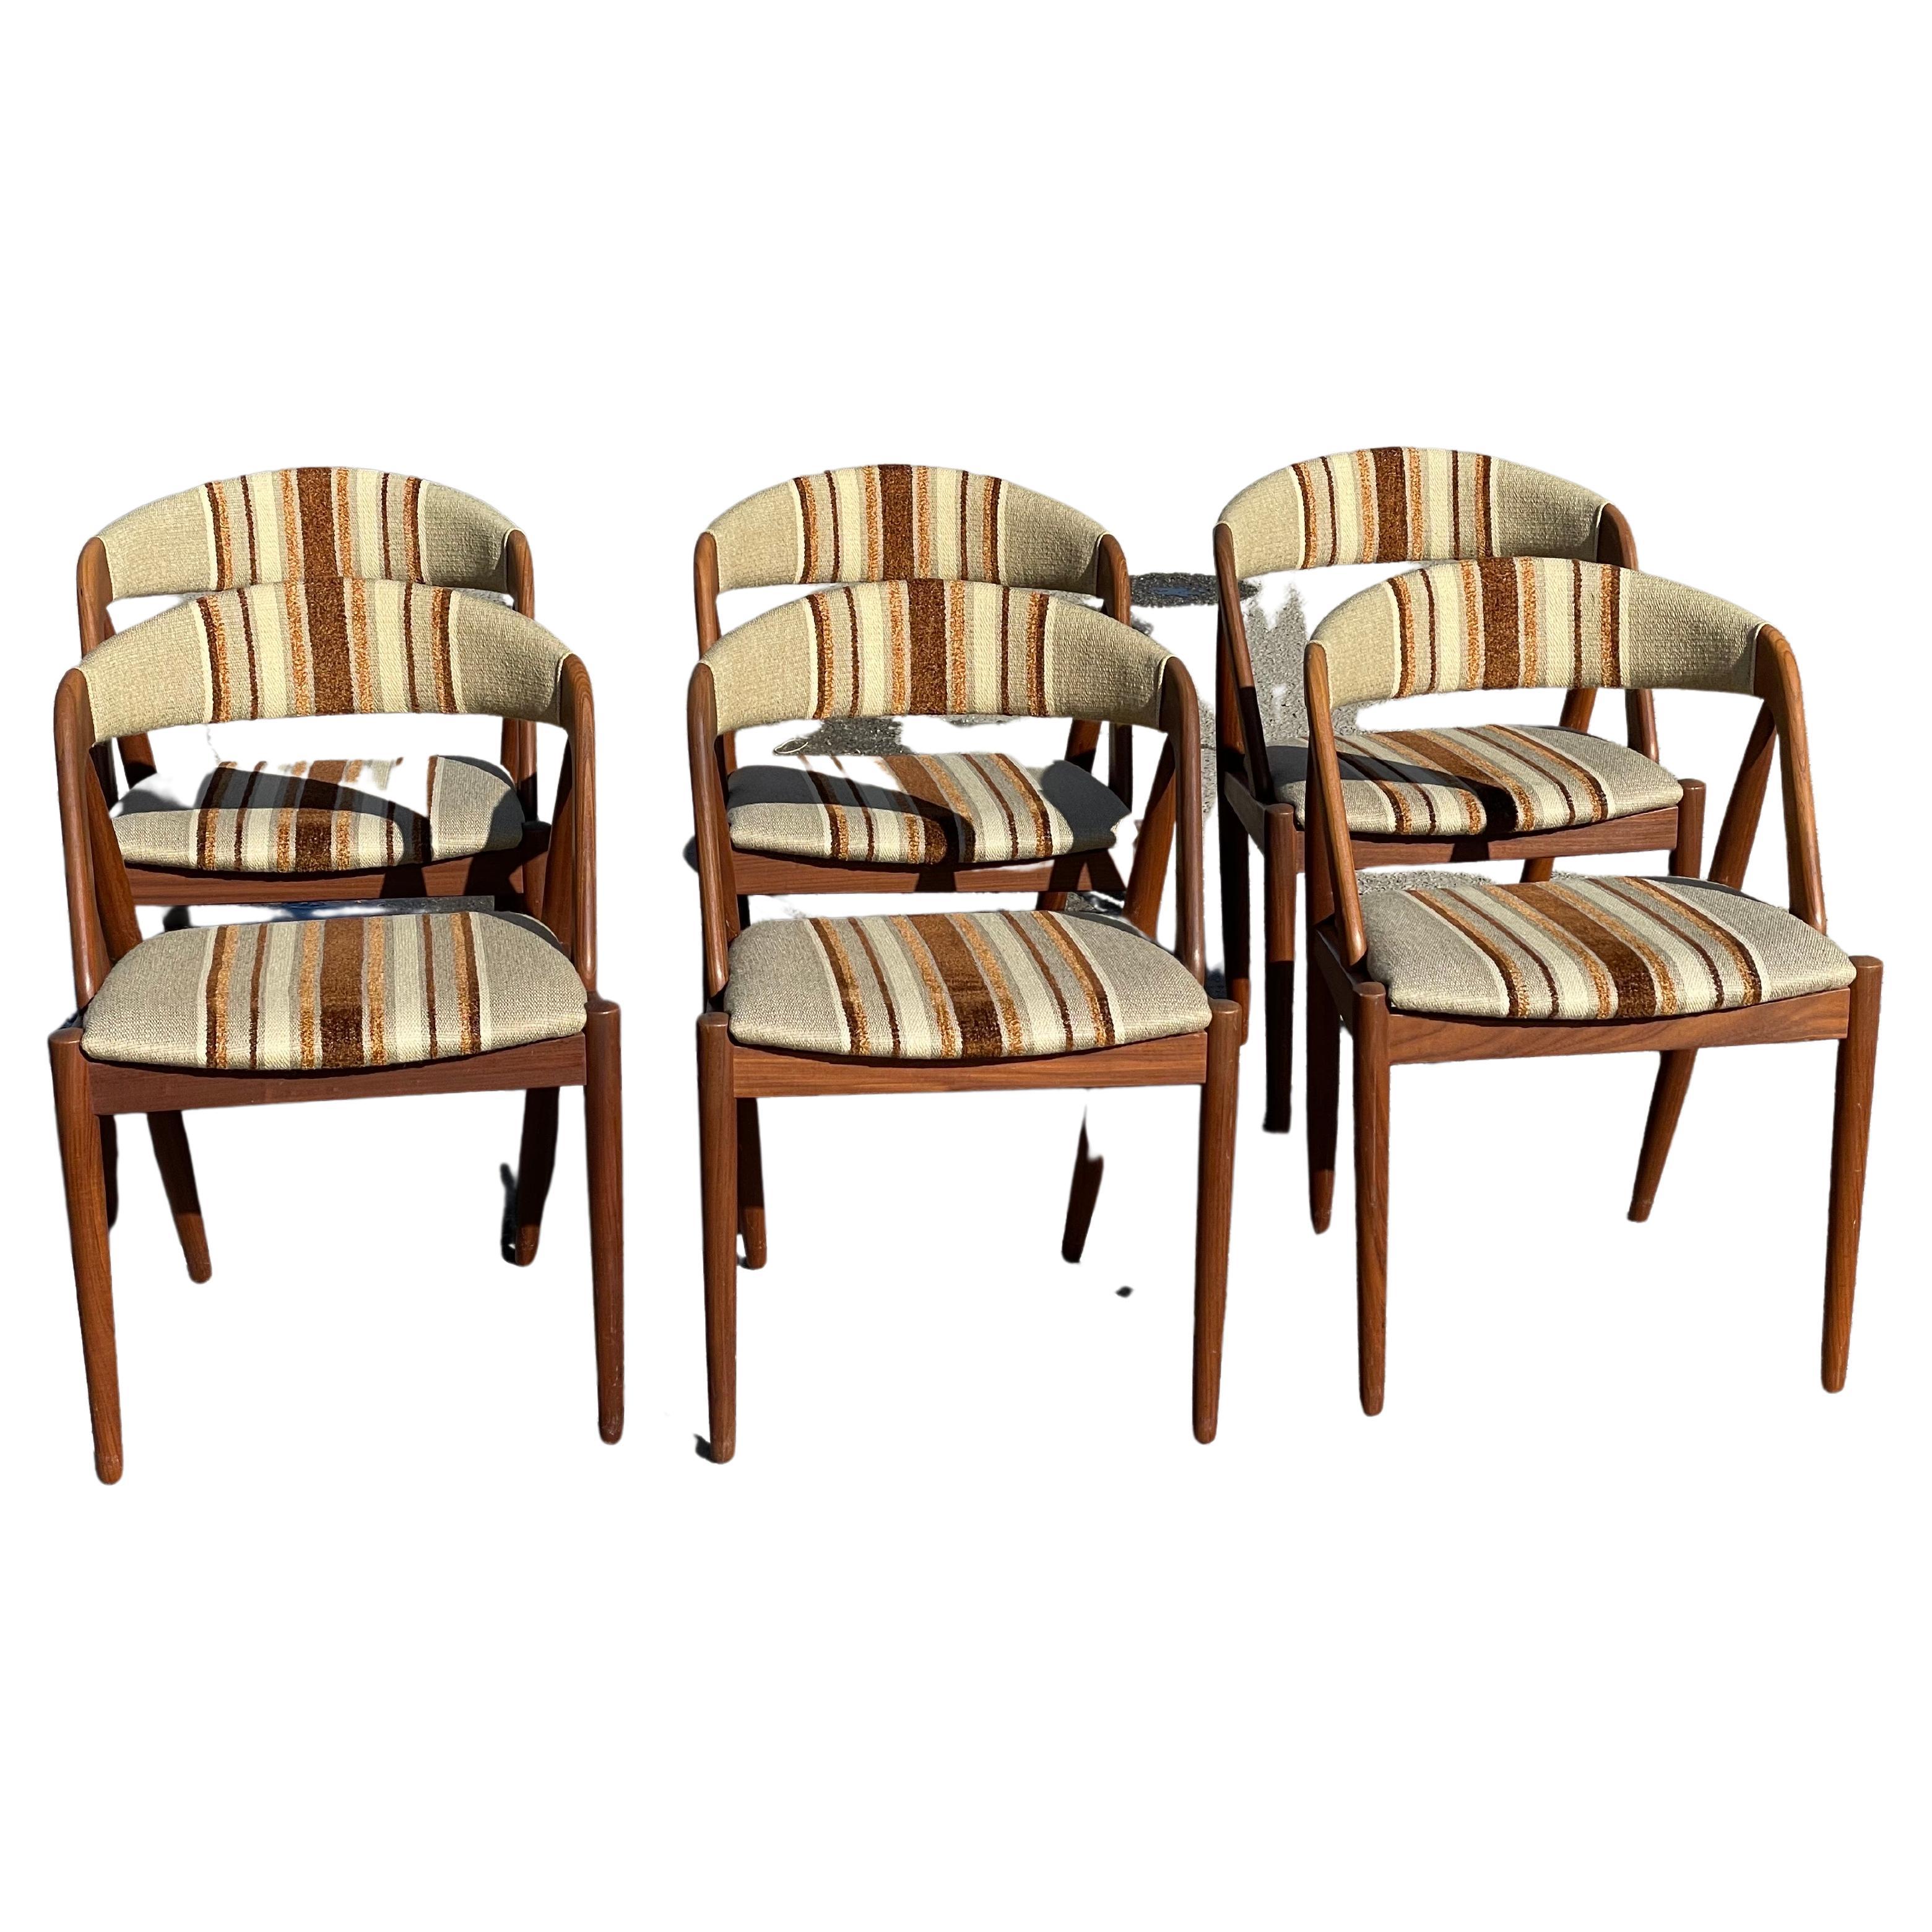 Elegant set of 6 'model 31' dining chairs designed by Kai Kristiansen and manufactured by Schou Andersen, Denmark 1956. These typical Danish Modern dining chairs have solid teak frames and in the original upholstery. Another nice detail is the back